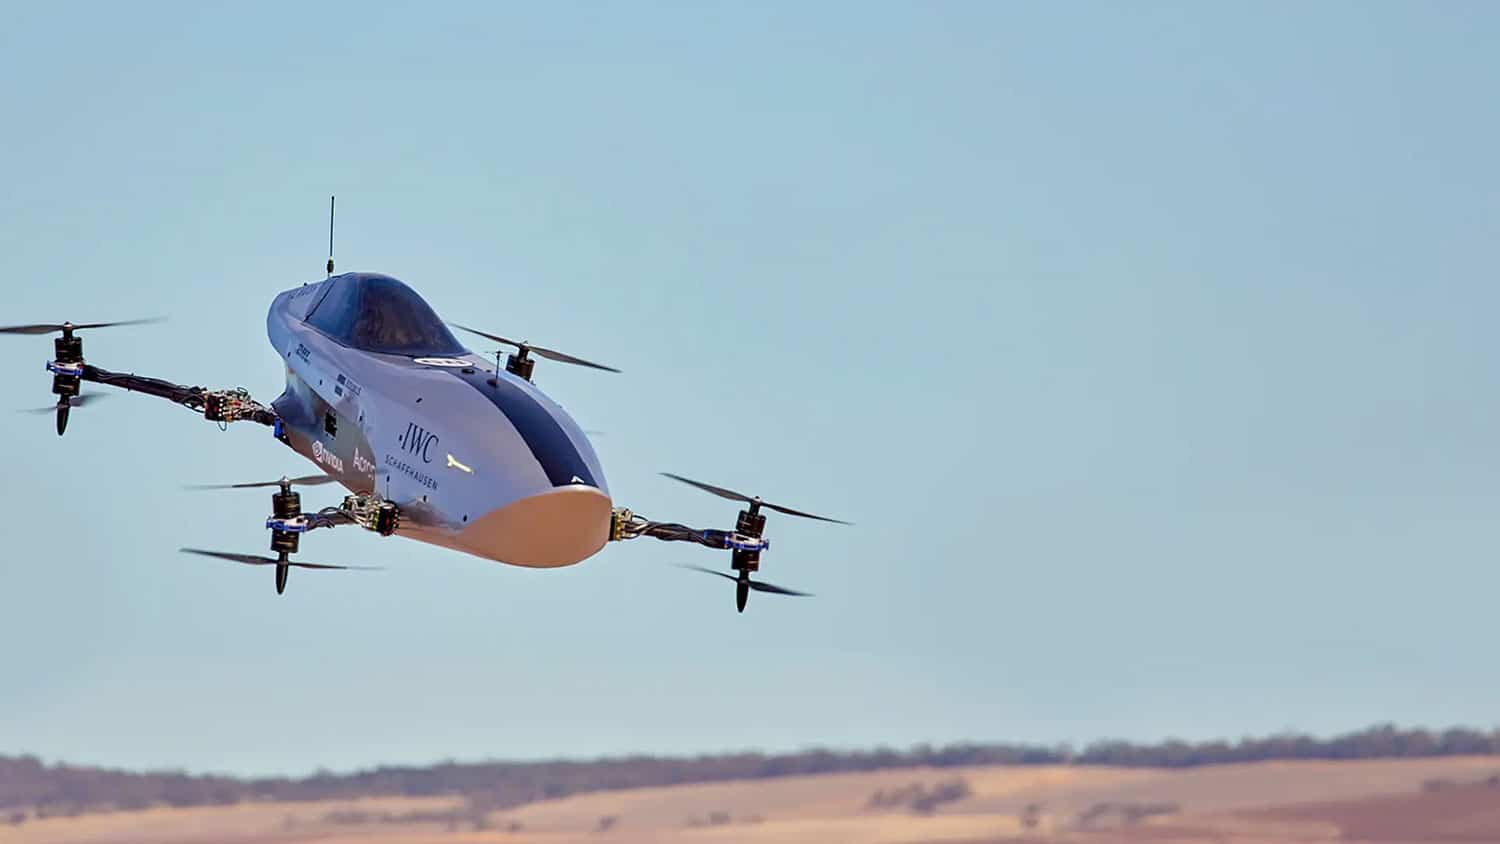 World's first flying race car Airspeeder Mk3 makes historic first flight.